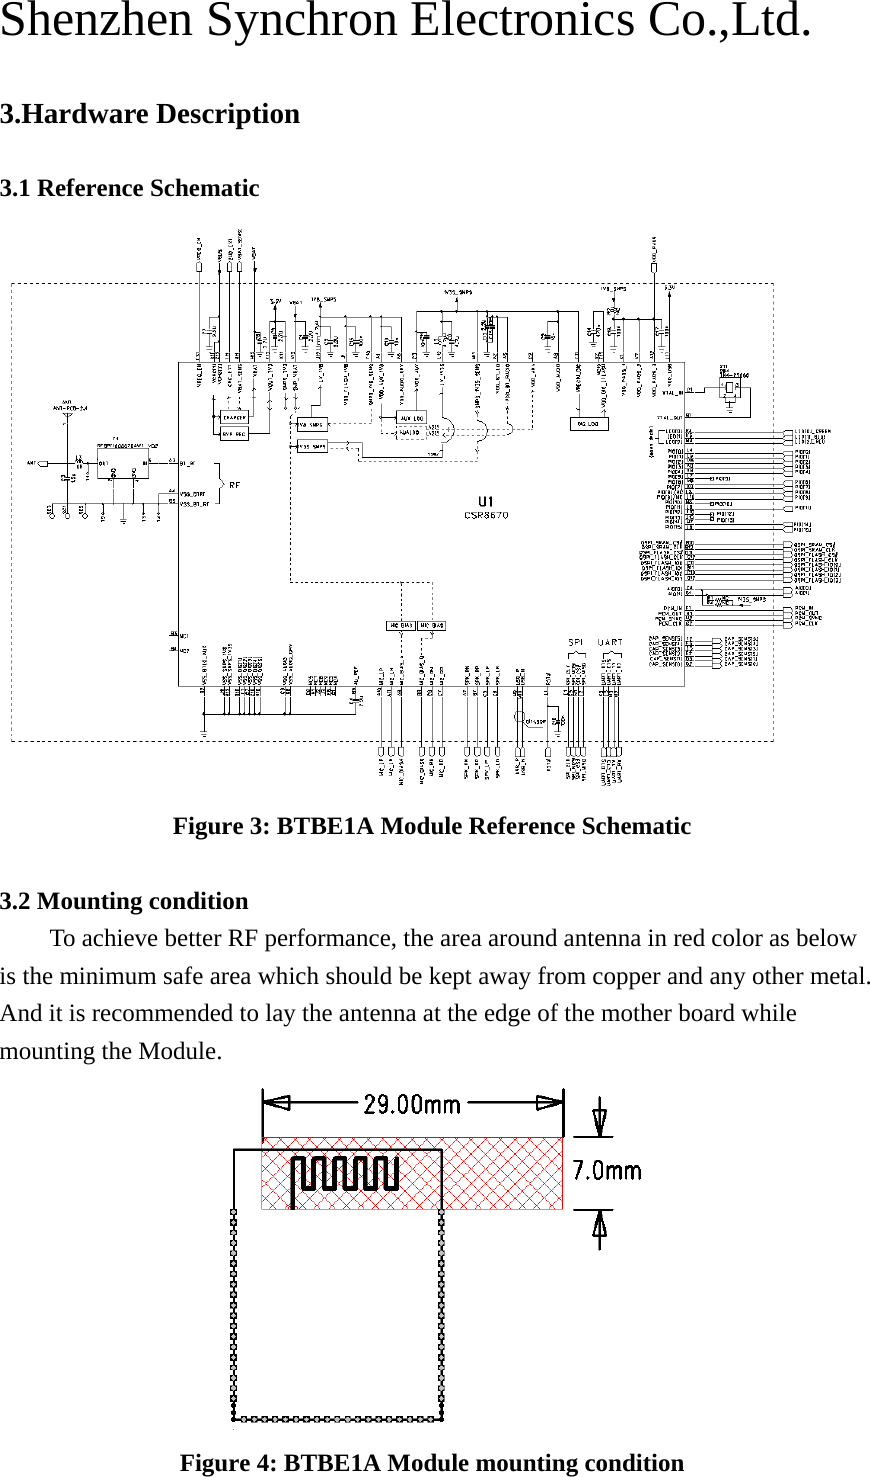 Shenzhen Synchron Electronics Co.,Ltd.   3.Hardware Description  3.1 Reference Schematic  Figure 3: BTBE1A Module Reference Schematic  3.2 Mounting condition     To achieve better RF performance, the area around antenna in red color as below is the minimum safe area which should be kept away from copper and any other metal. And it is recommended to lay the antenna at the edge of the mother board while mounting the Module.  Figure 4: BTBE1A Module mounting condition  